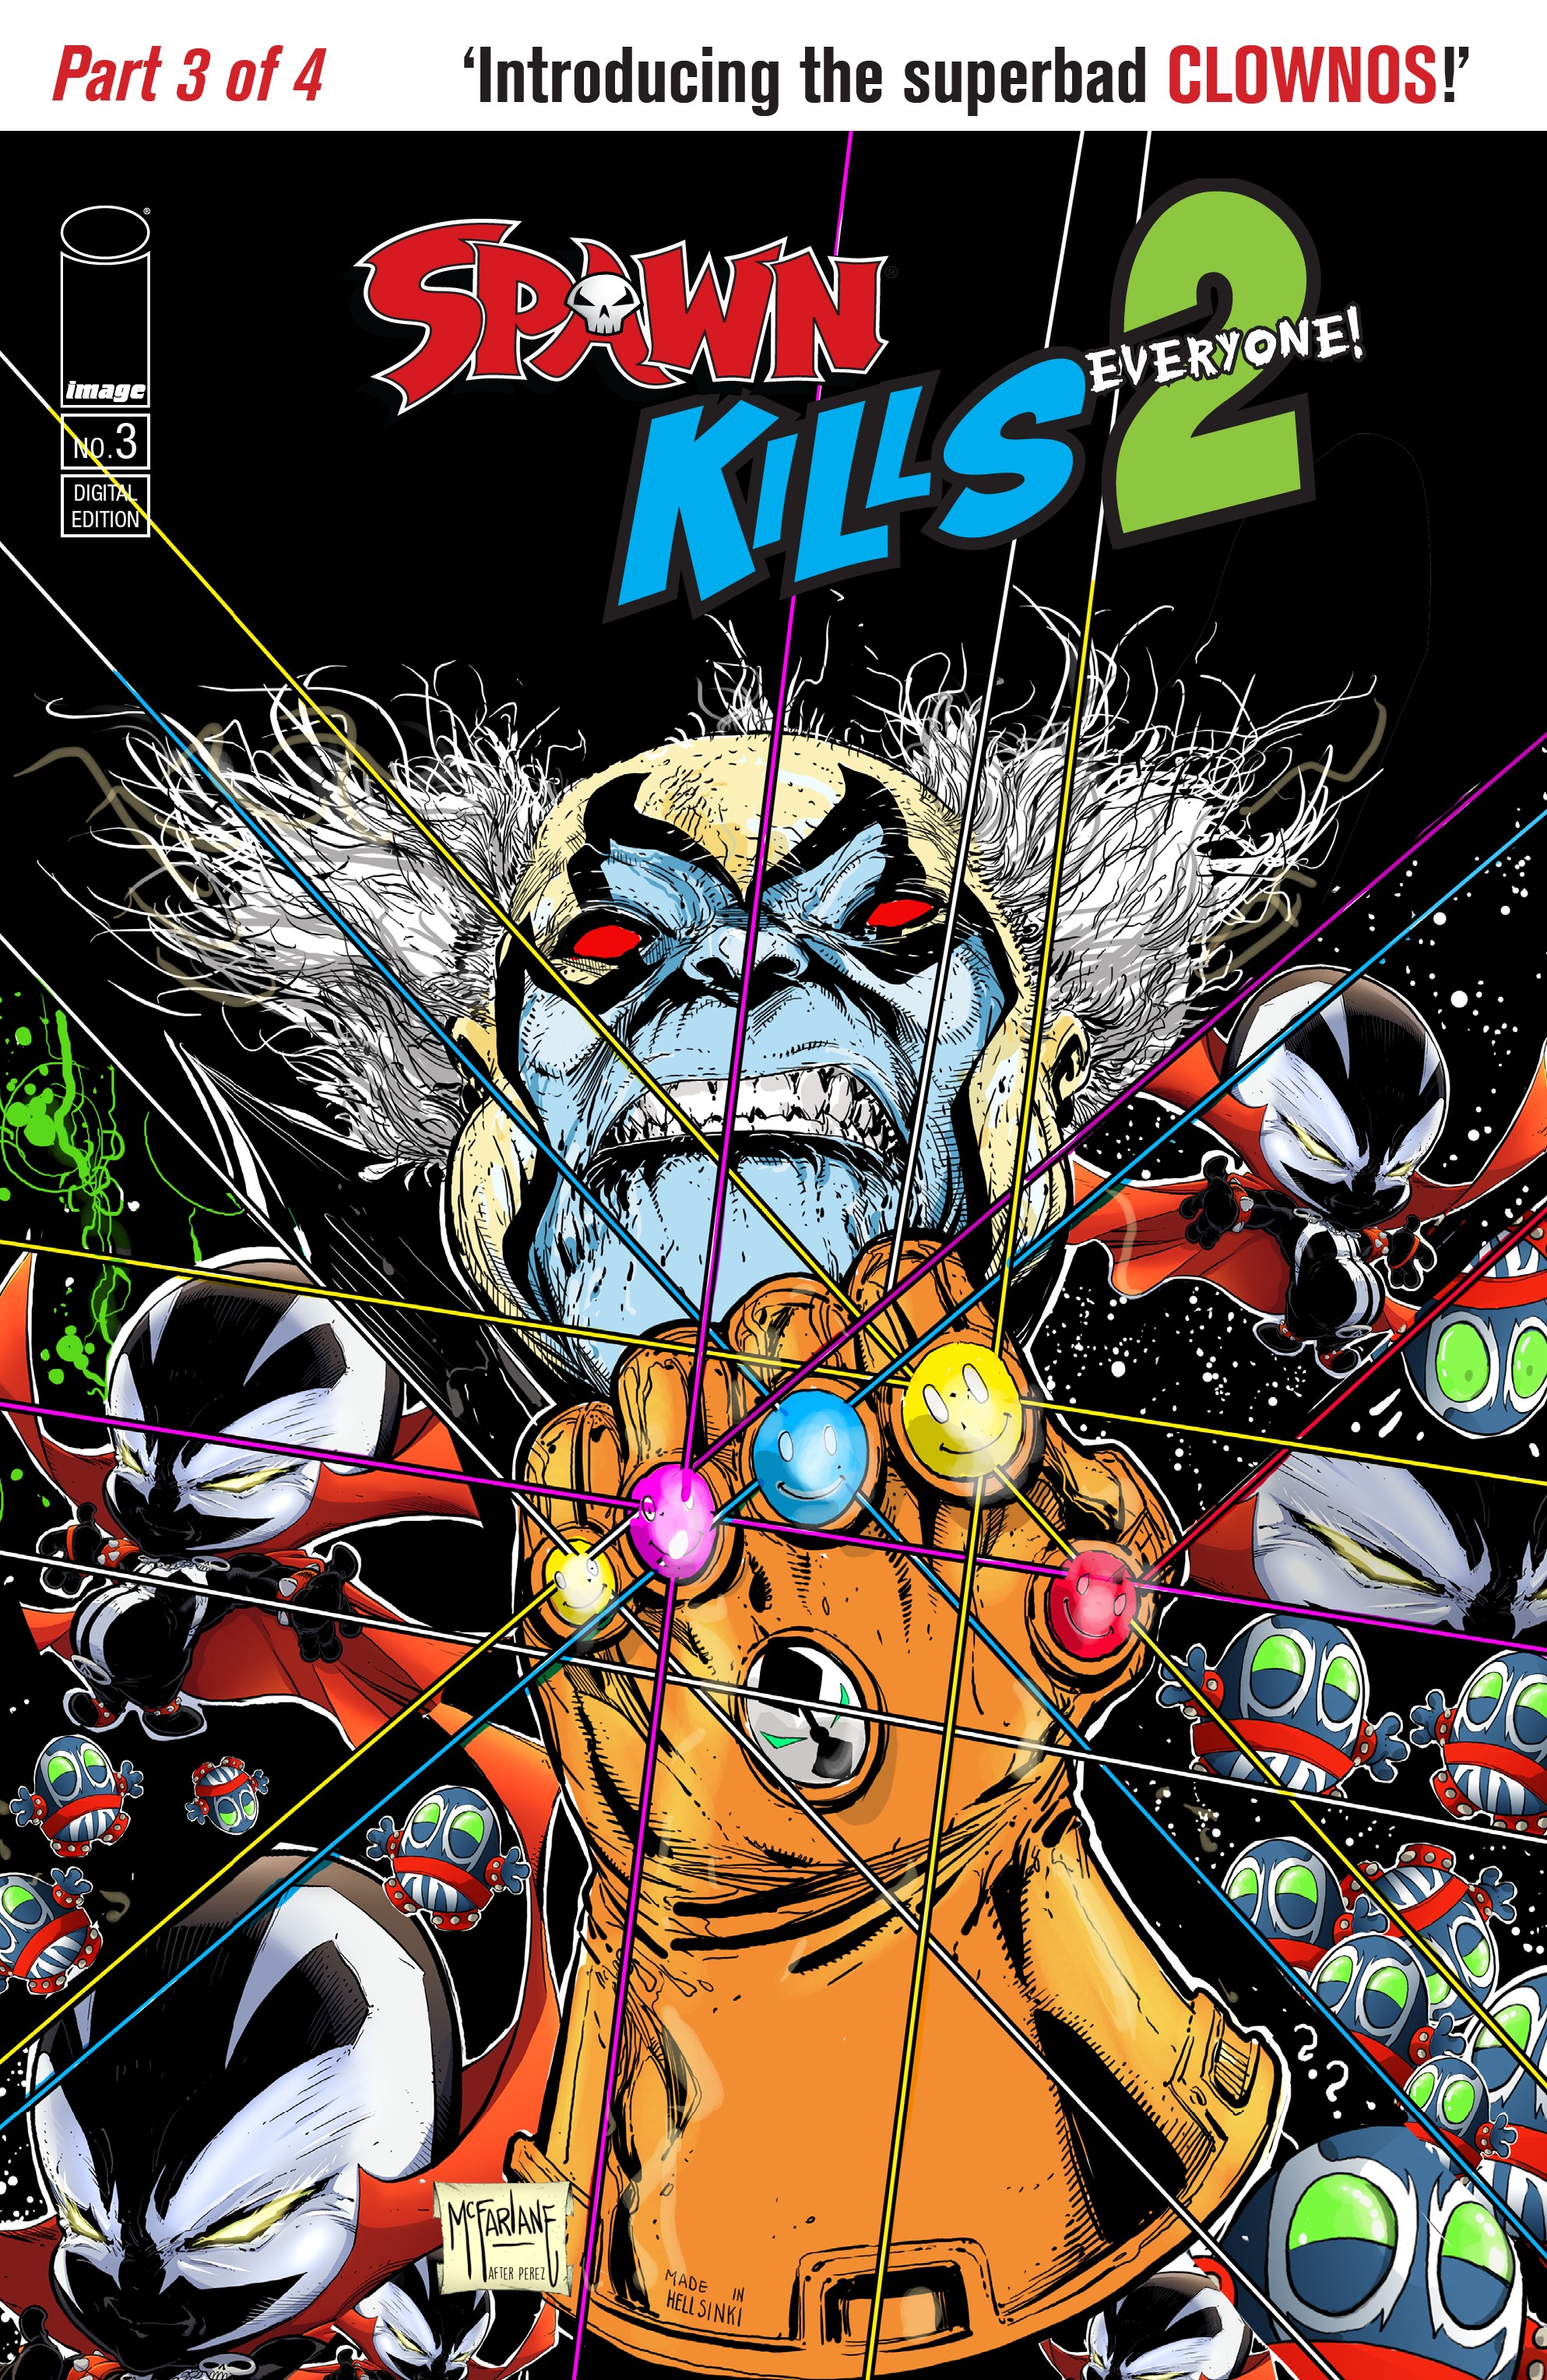 Spawn Kills Everyone Too (2018-): Chapter 3 - Page 1